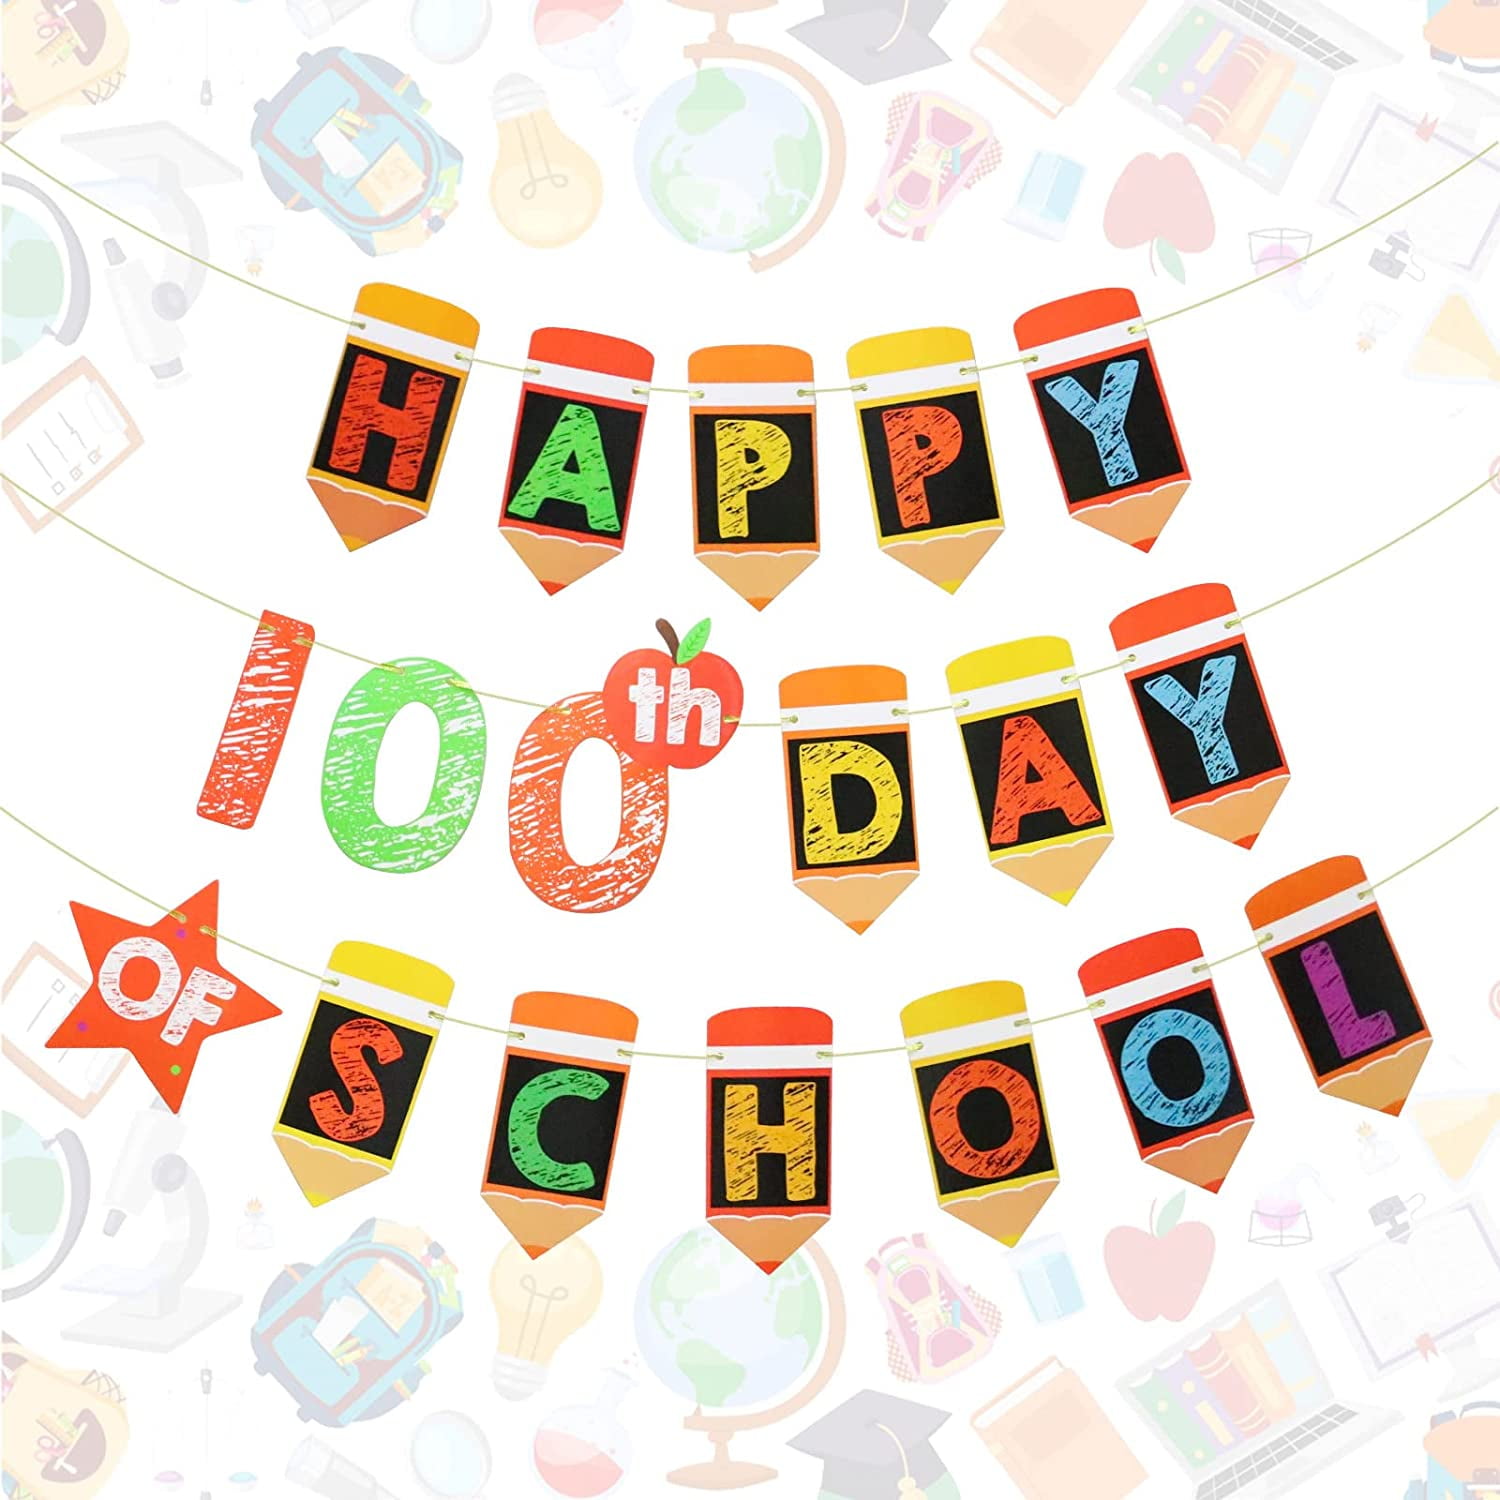 100th Day of School Banner, 100 Days of School Decorations, Happy 100th Day  of School Party Supplies for Kindergarten Pre-school Primary High School  Classroom Decor - Pre-Assembled 